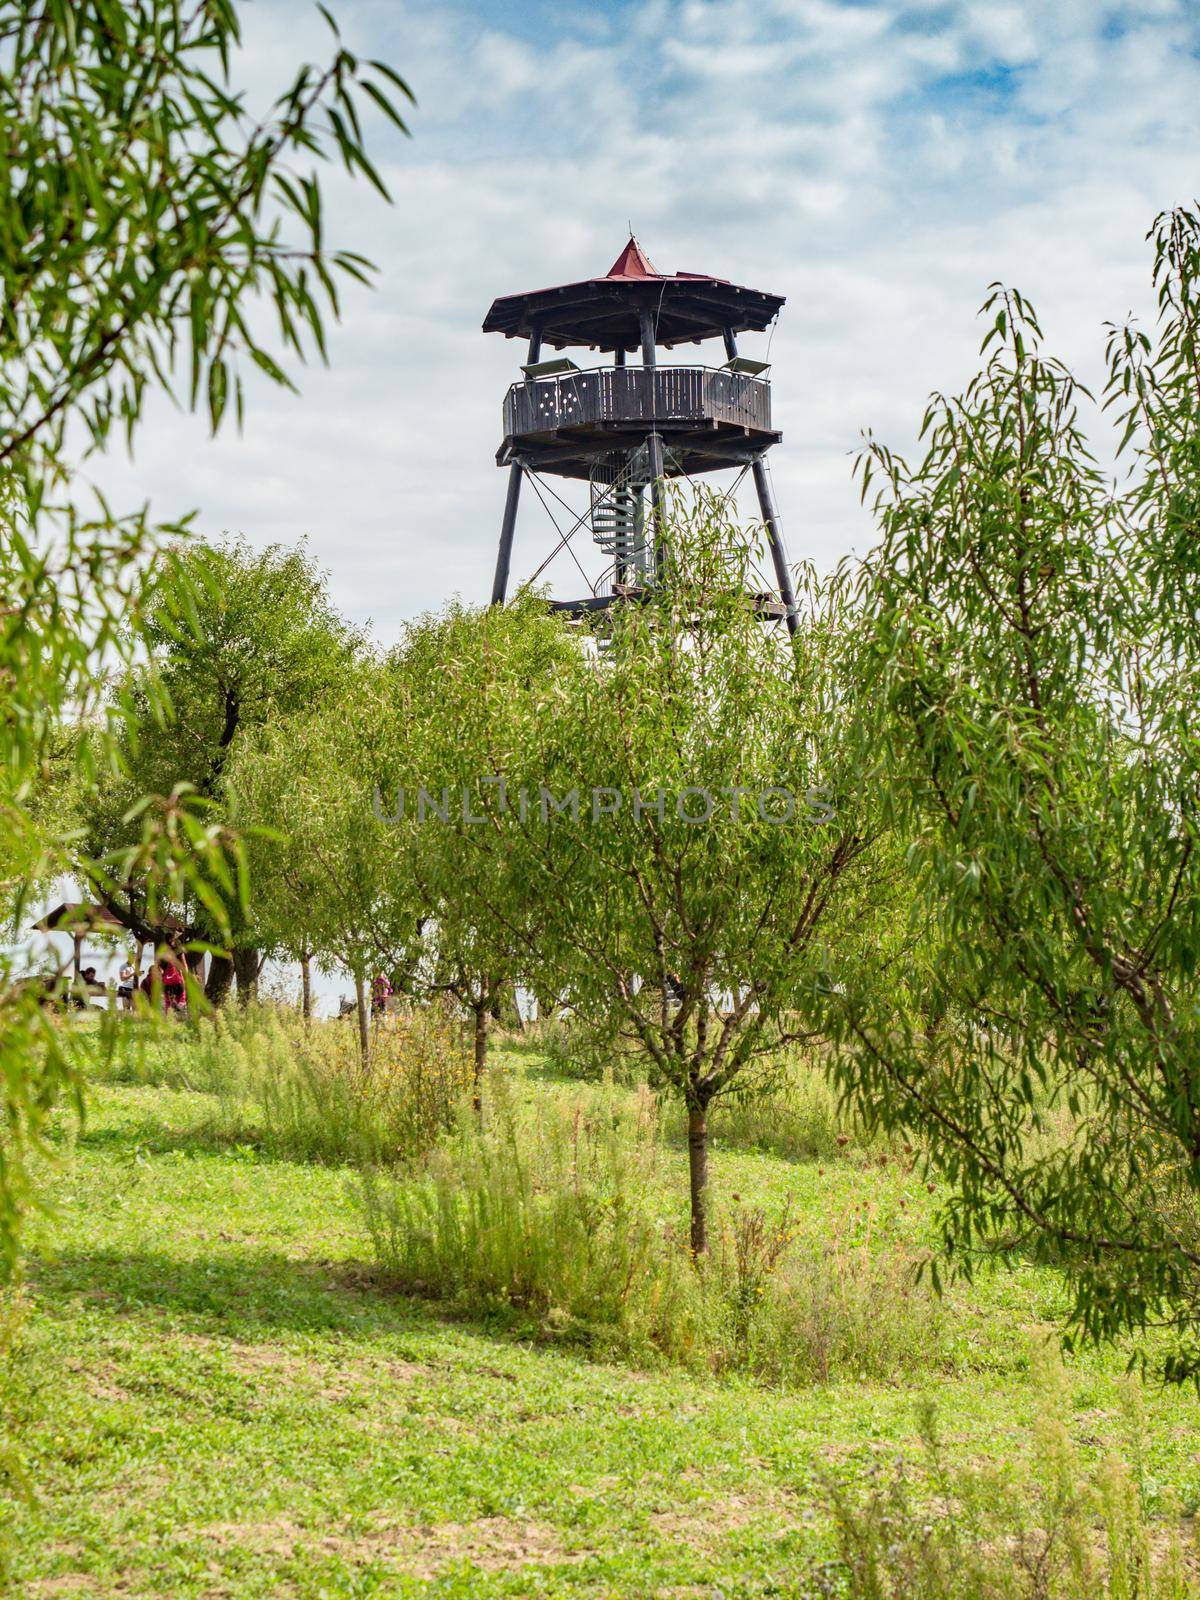 The lookout tower in the almond orchard at Hustopece town by rdonar2